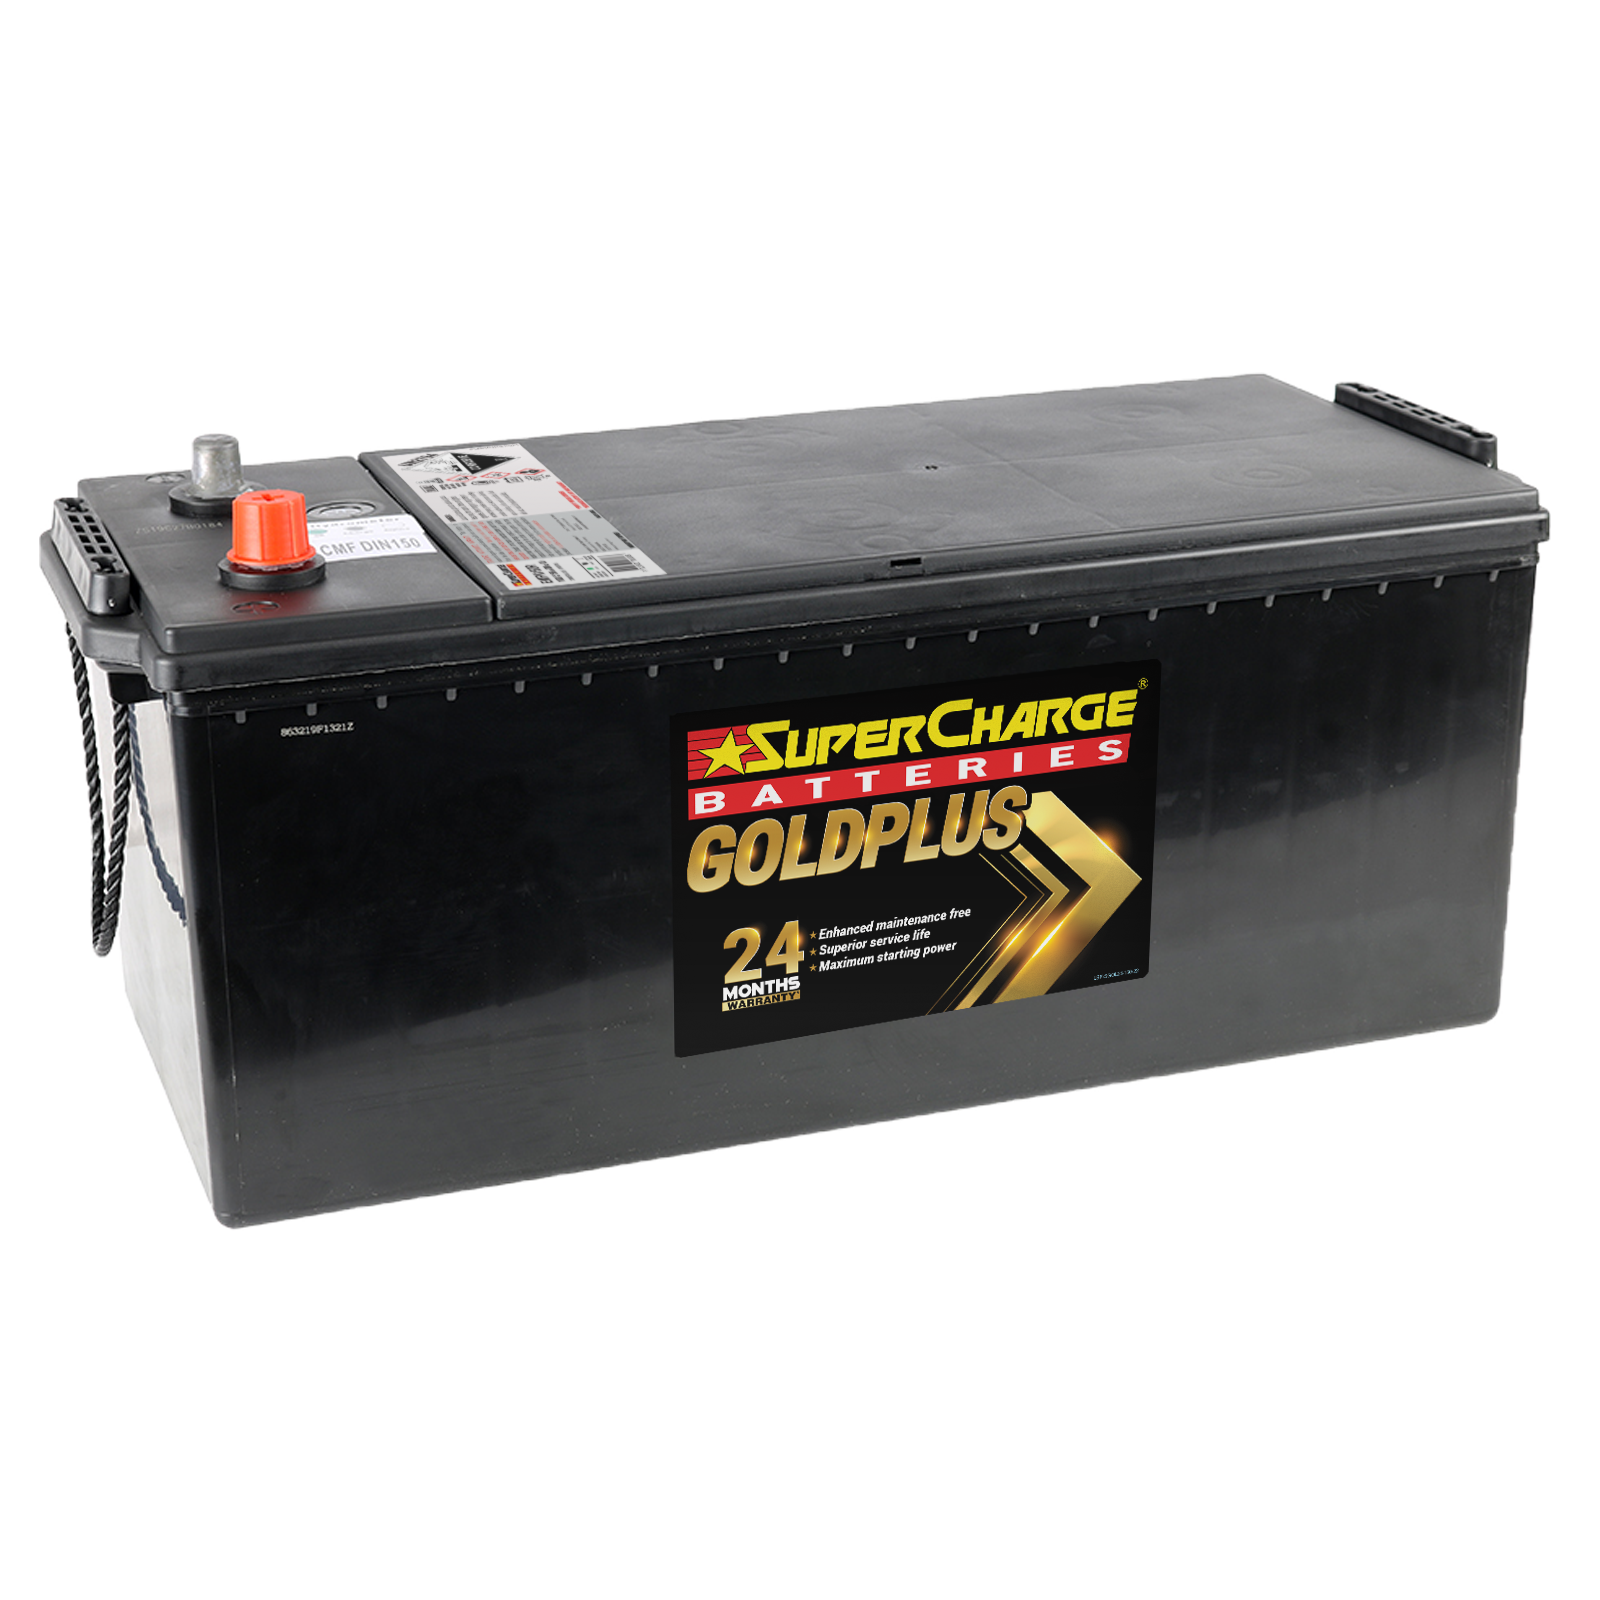 EMFN150R High-Performance Battery | Super Charge Batteries